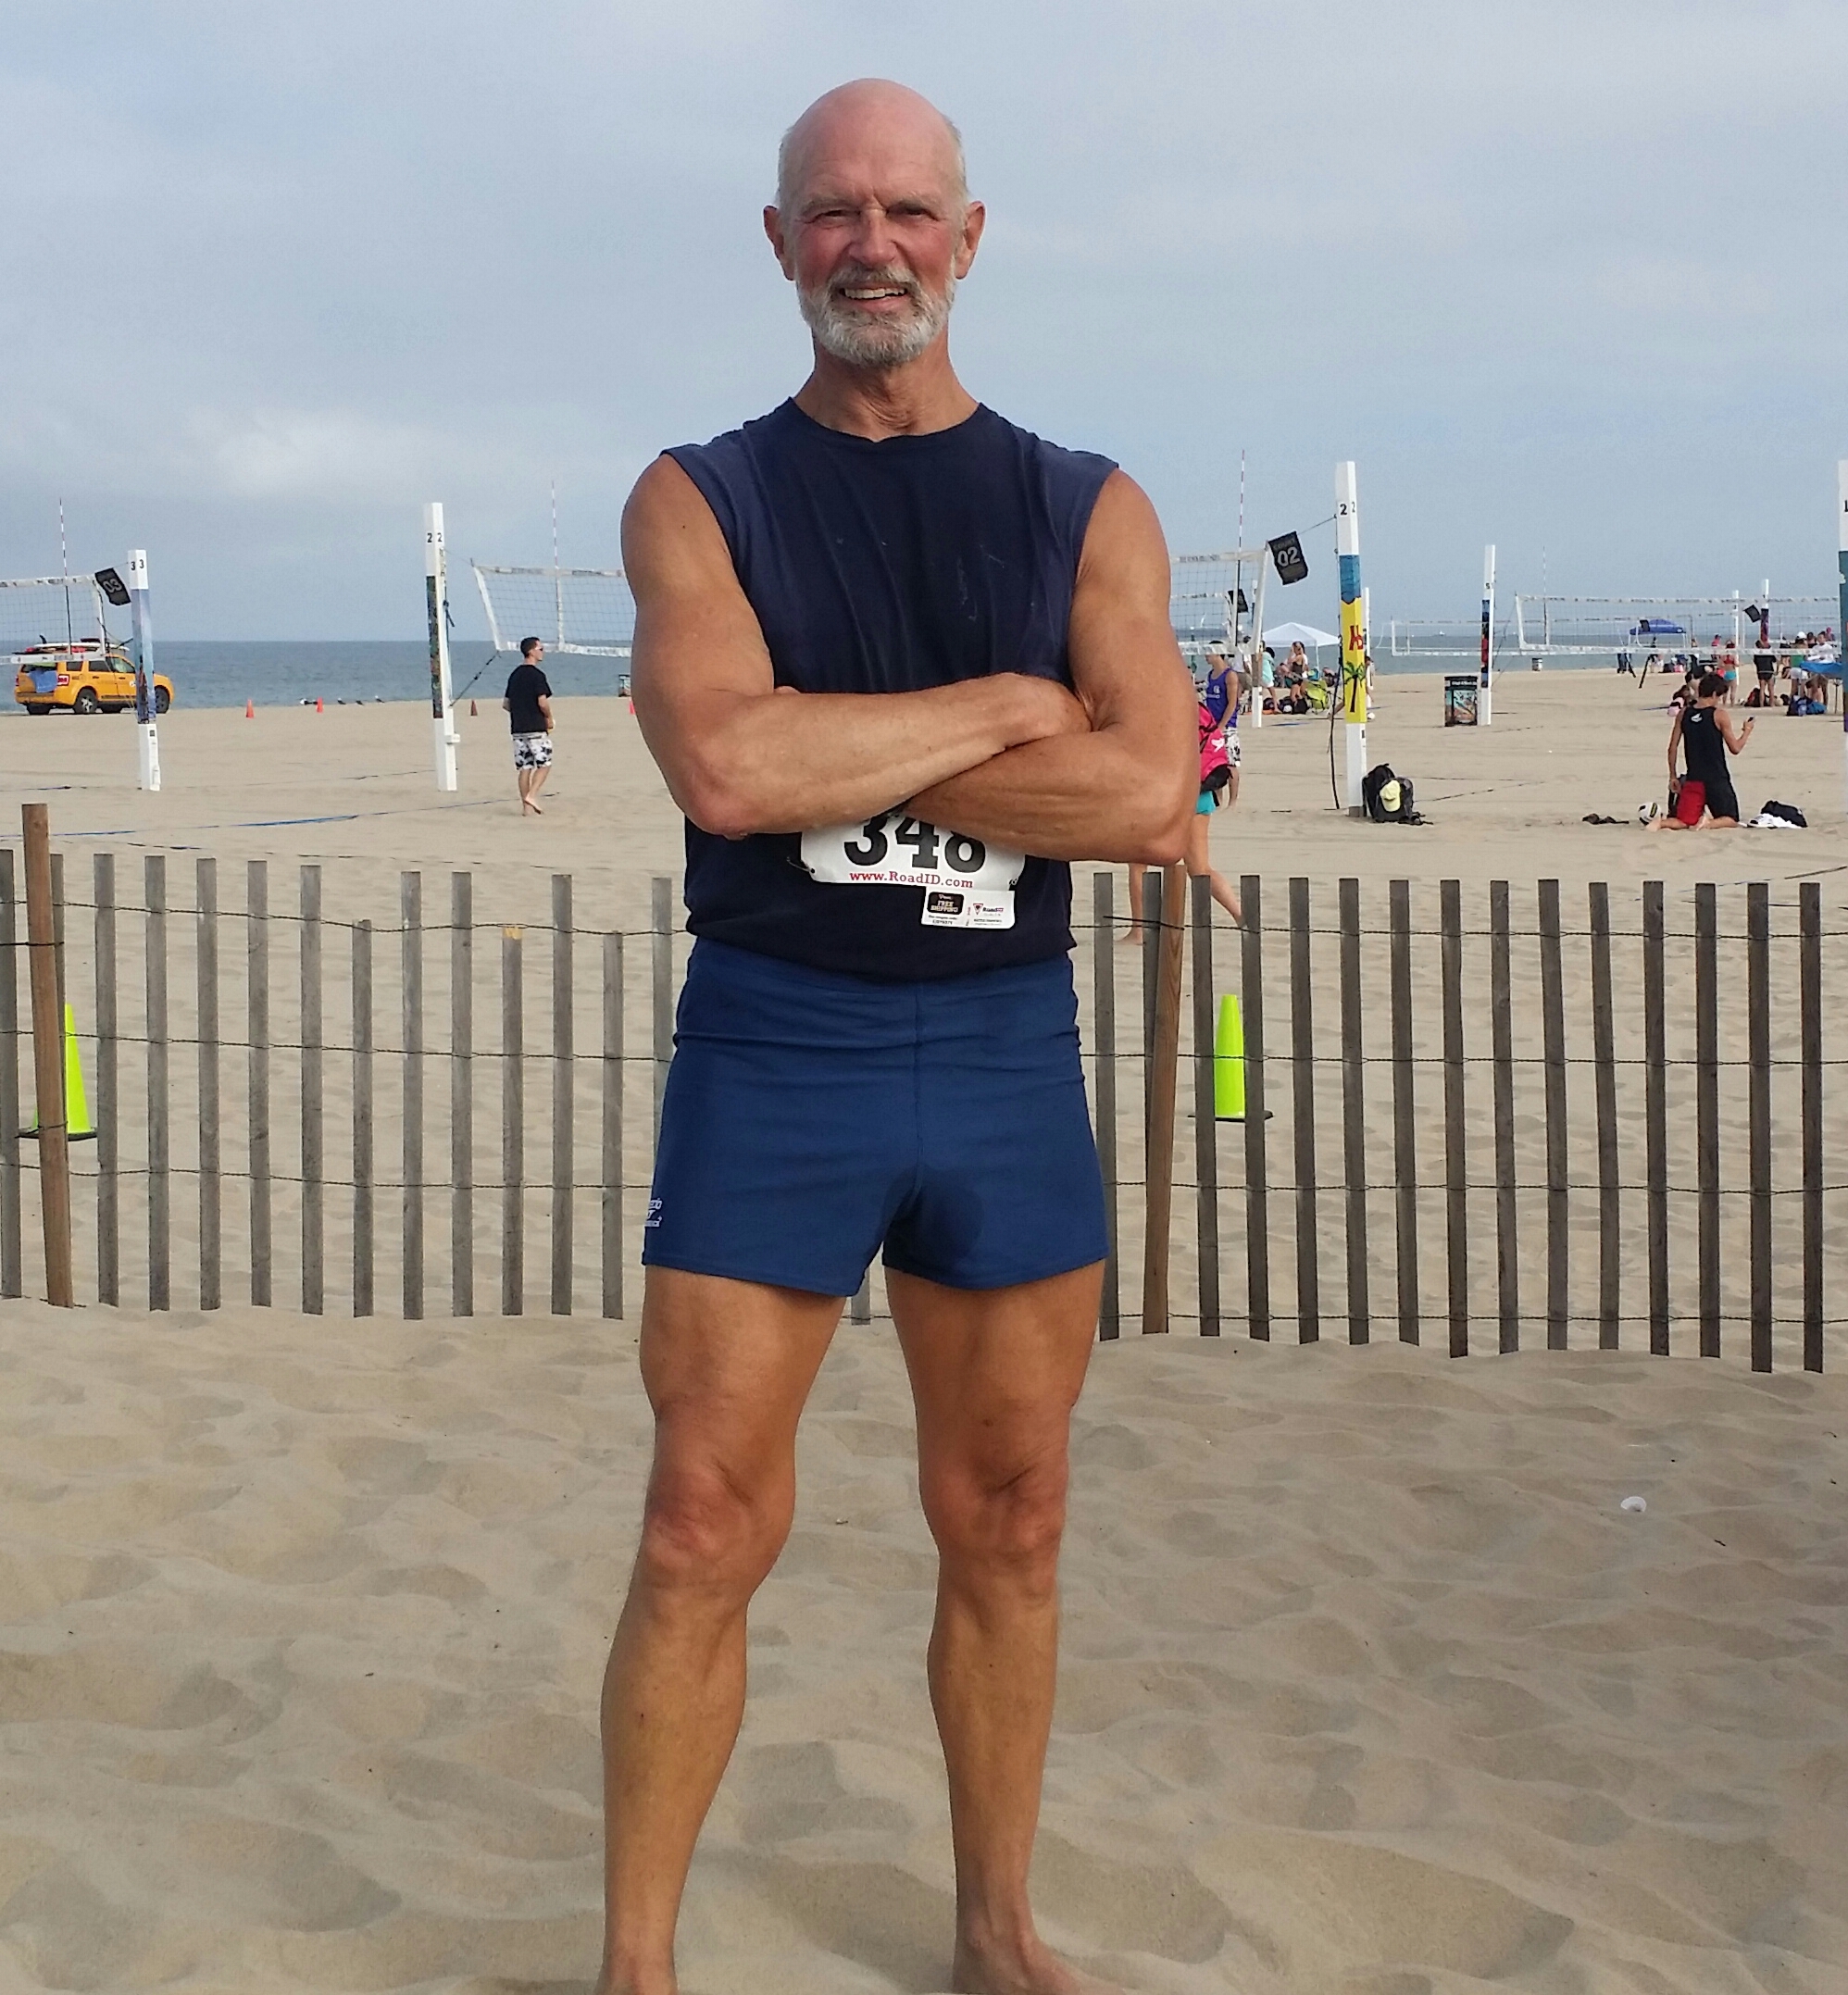 John Knox-A Happy Sand Runner on Sat. 7/12/14, after winning my Age Group [60 and Over] in the Pier to Pier Sand Run